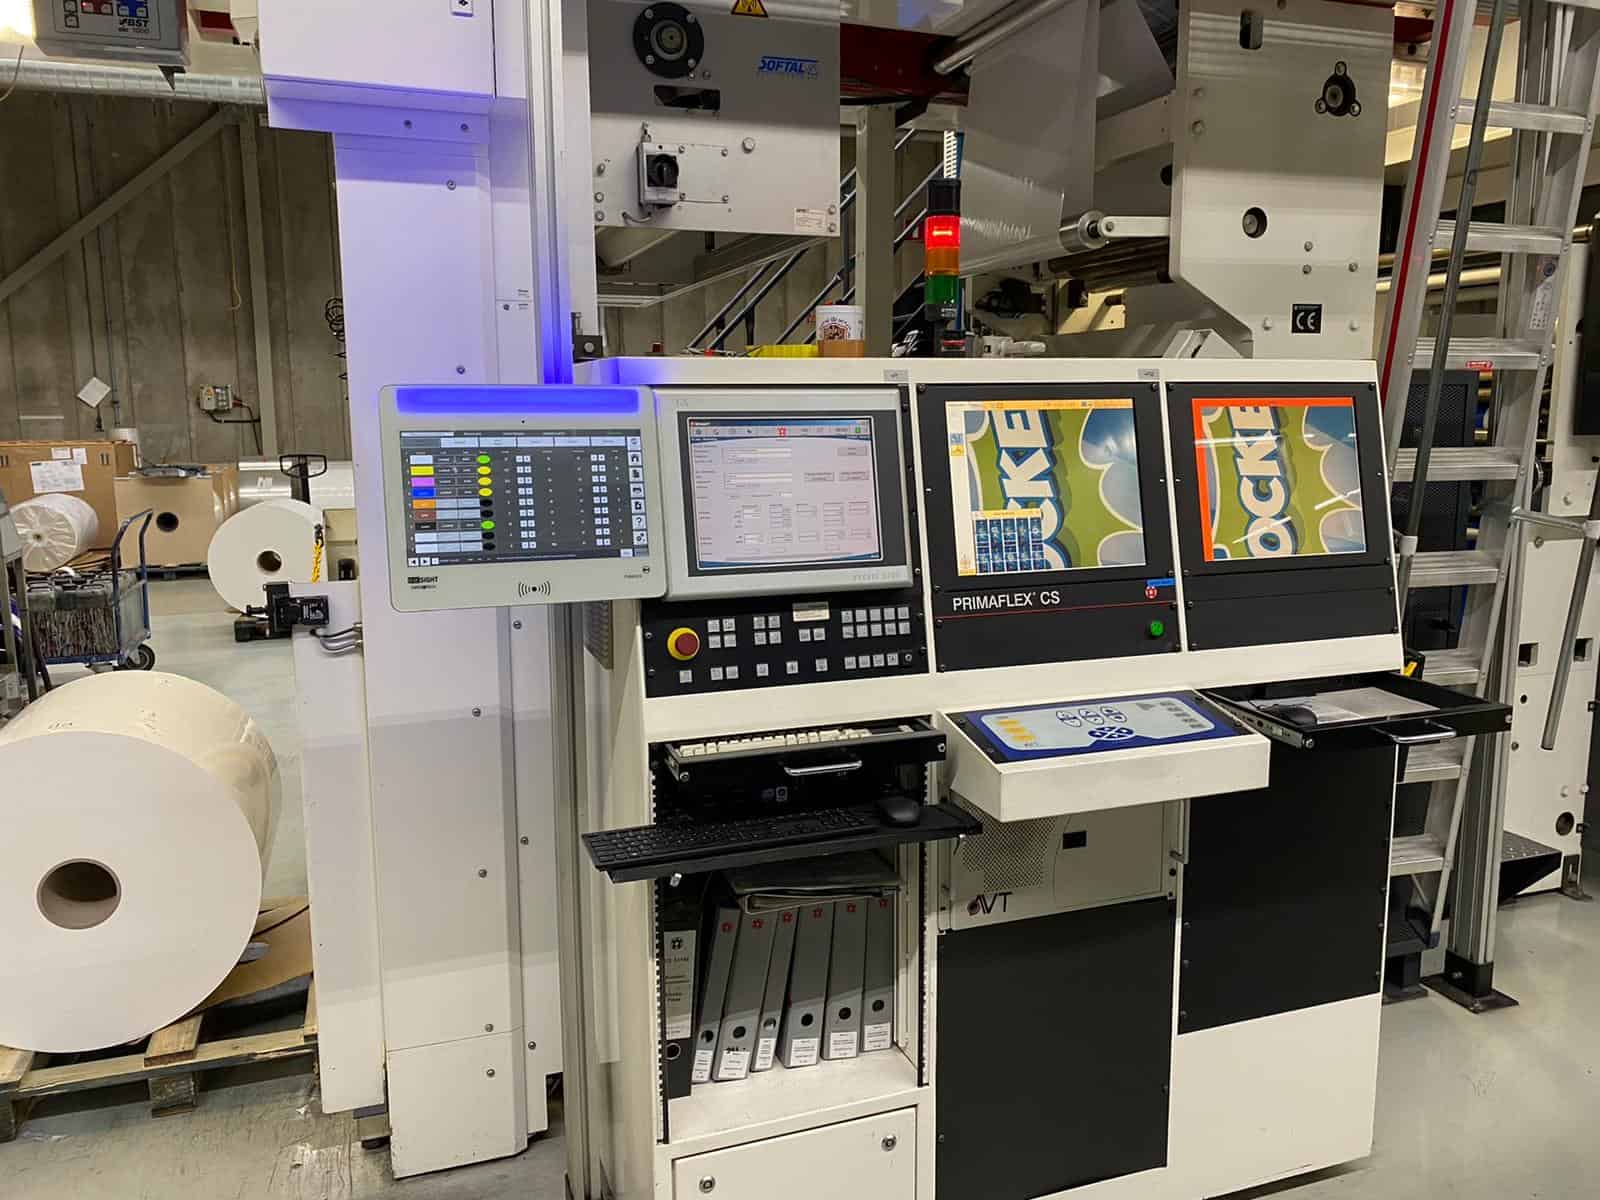 Maasmond Paperindustrie bv Oostvoorne in The Netherlands houses a W&H Primaflex CS press, equipped with viscosity sensors and other automated print quality control systems.